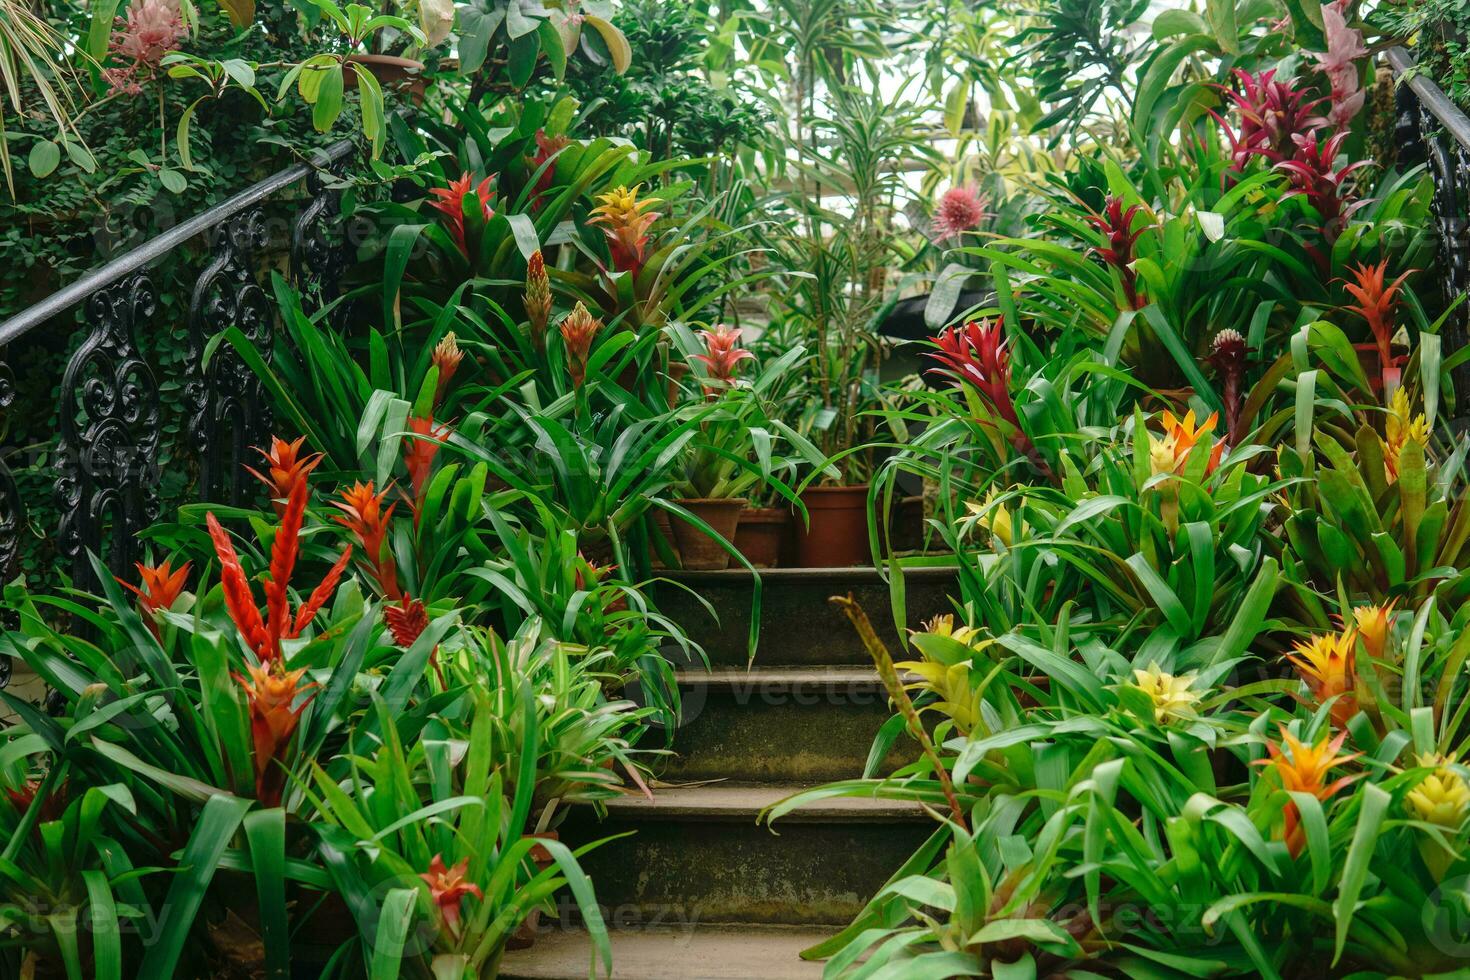 blooming bromeliads in pots on the steps of a vintage staircase among tropical plants in an old greenhouse photo